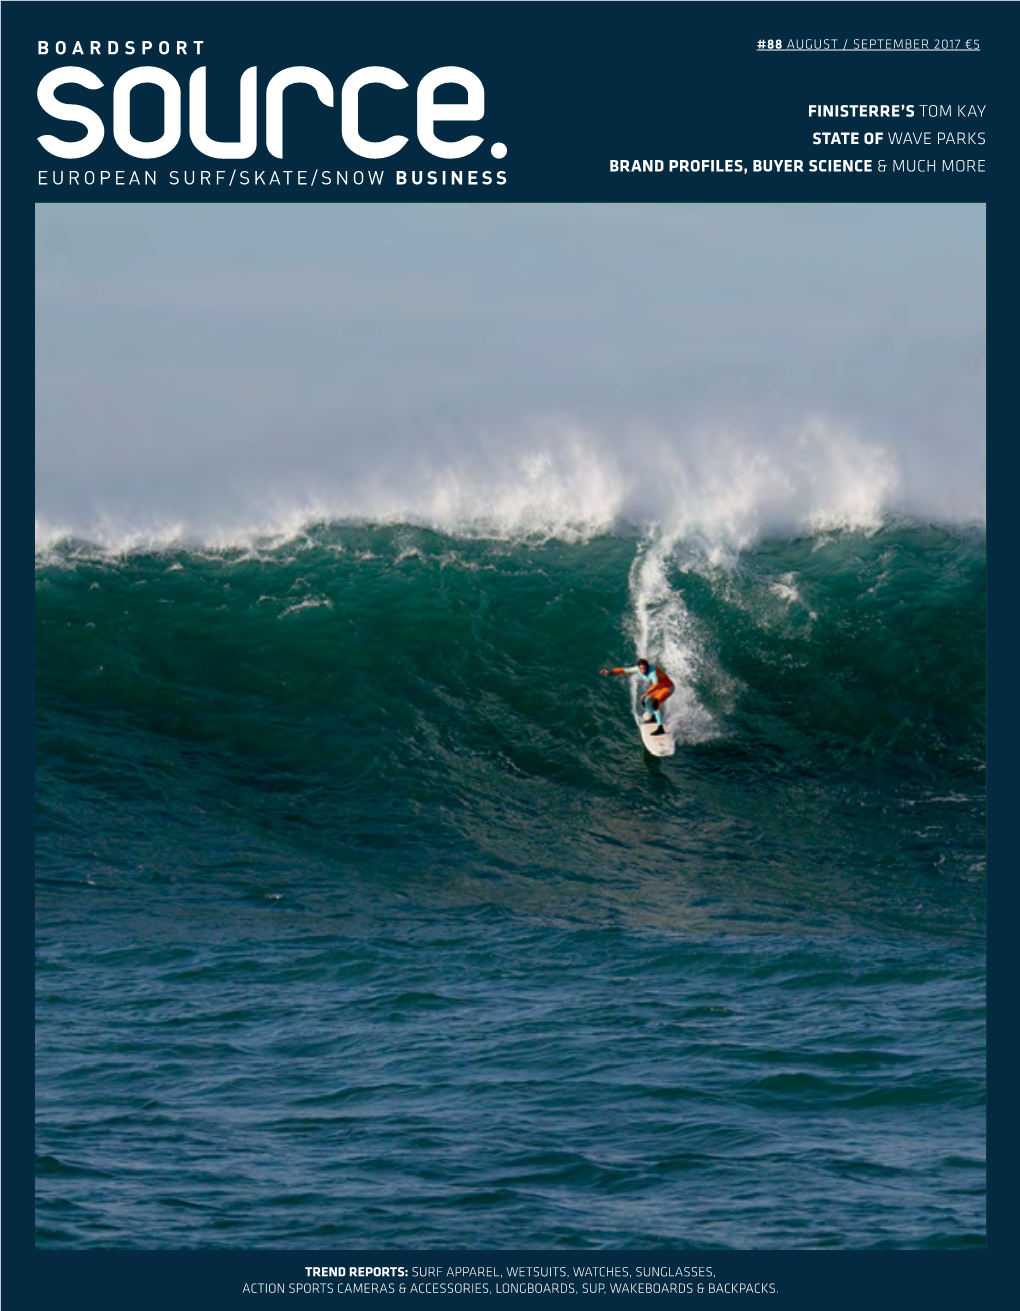 Finisterre's Tom Kay State of Wave